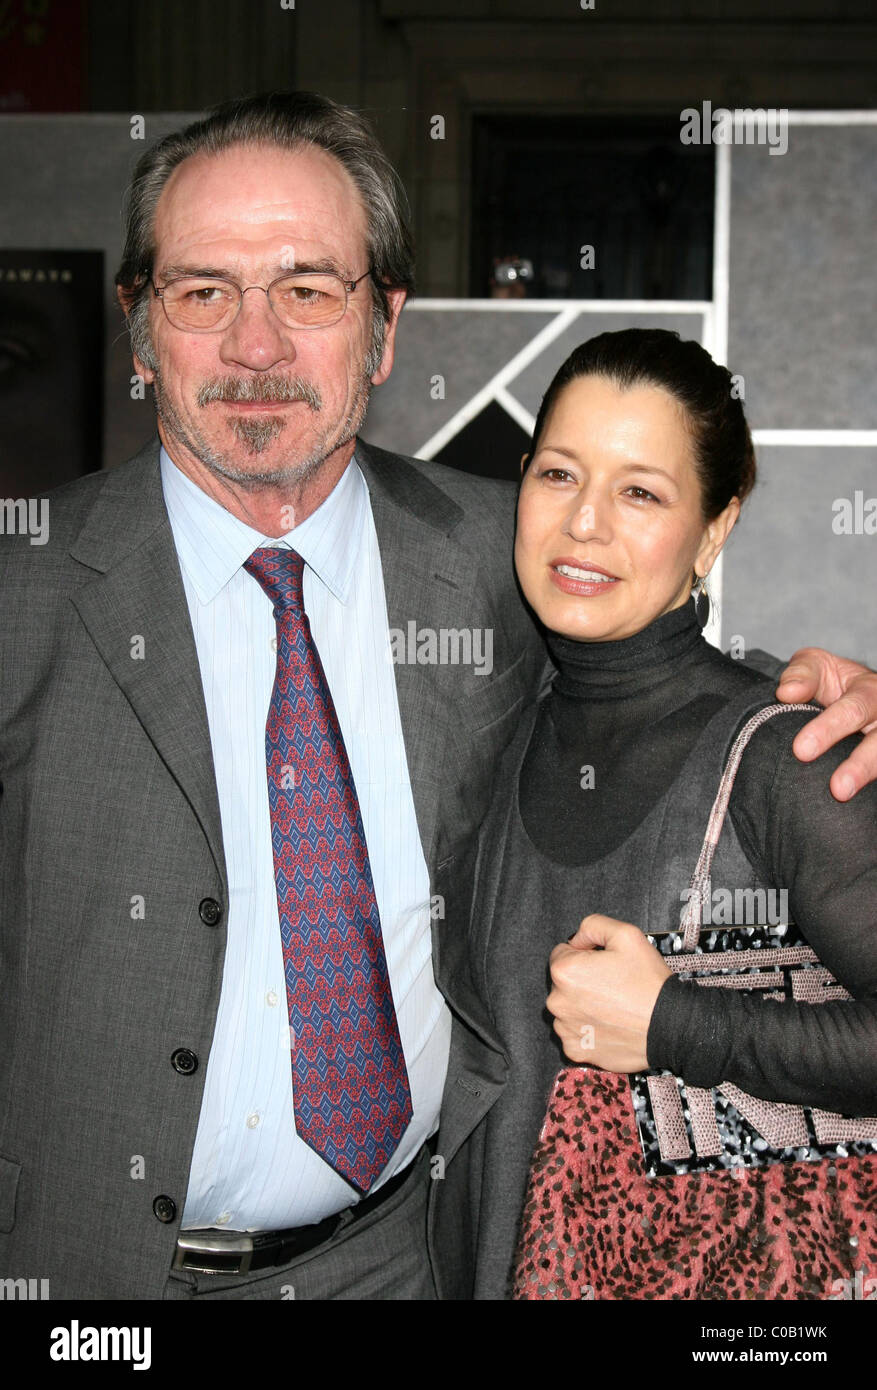 Tommy Lee Jones and wife Dawn Jones Premiere of 'No Country for Old Men' at  ArcLight Theaters - Arrivals Los Angeles Stock Photo - Alamy